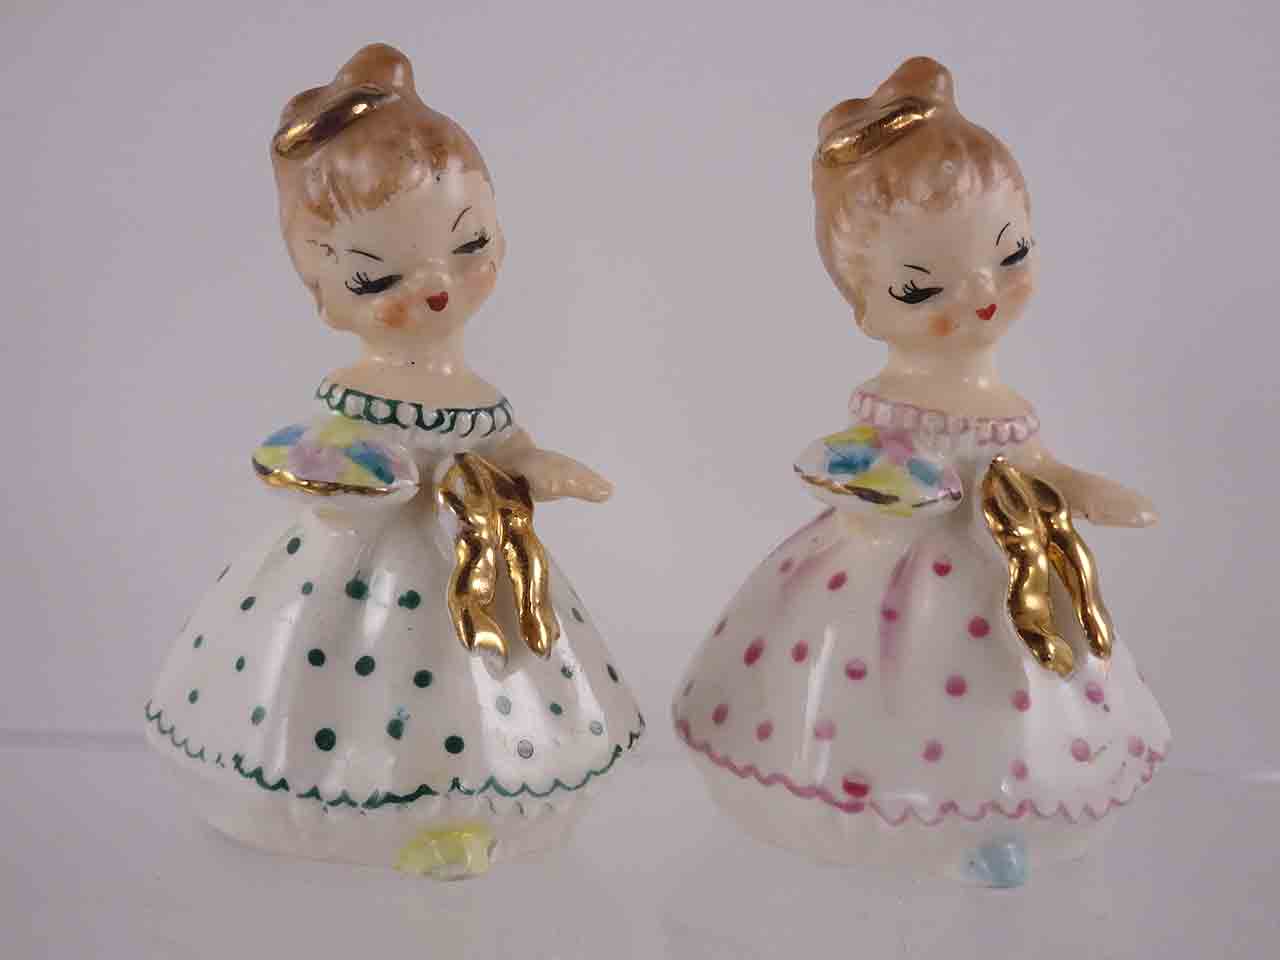 Marilyn-Exclusive CONSCO Japan imports - Girls in fancy dresses - salt and pepper shakers